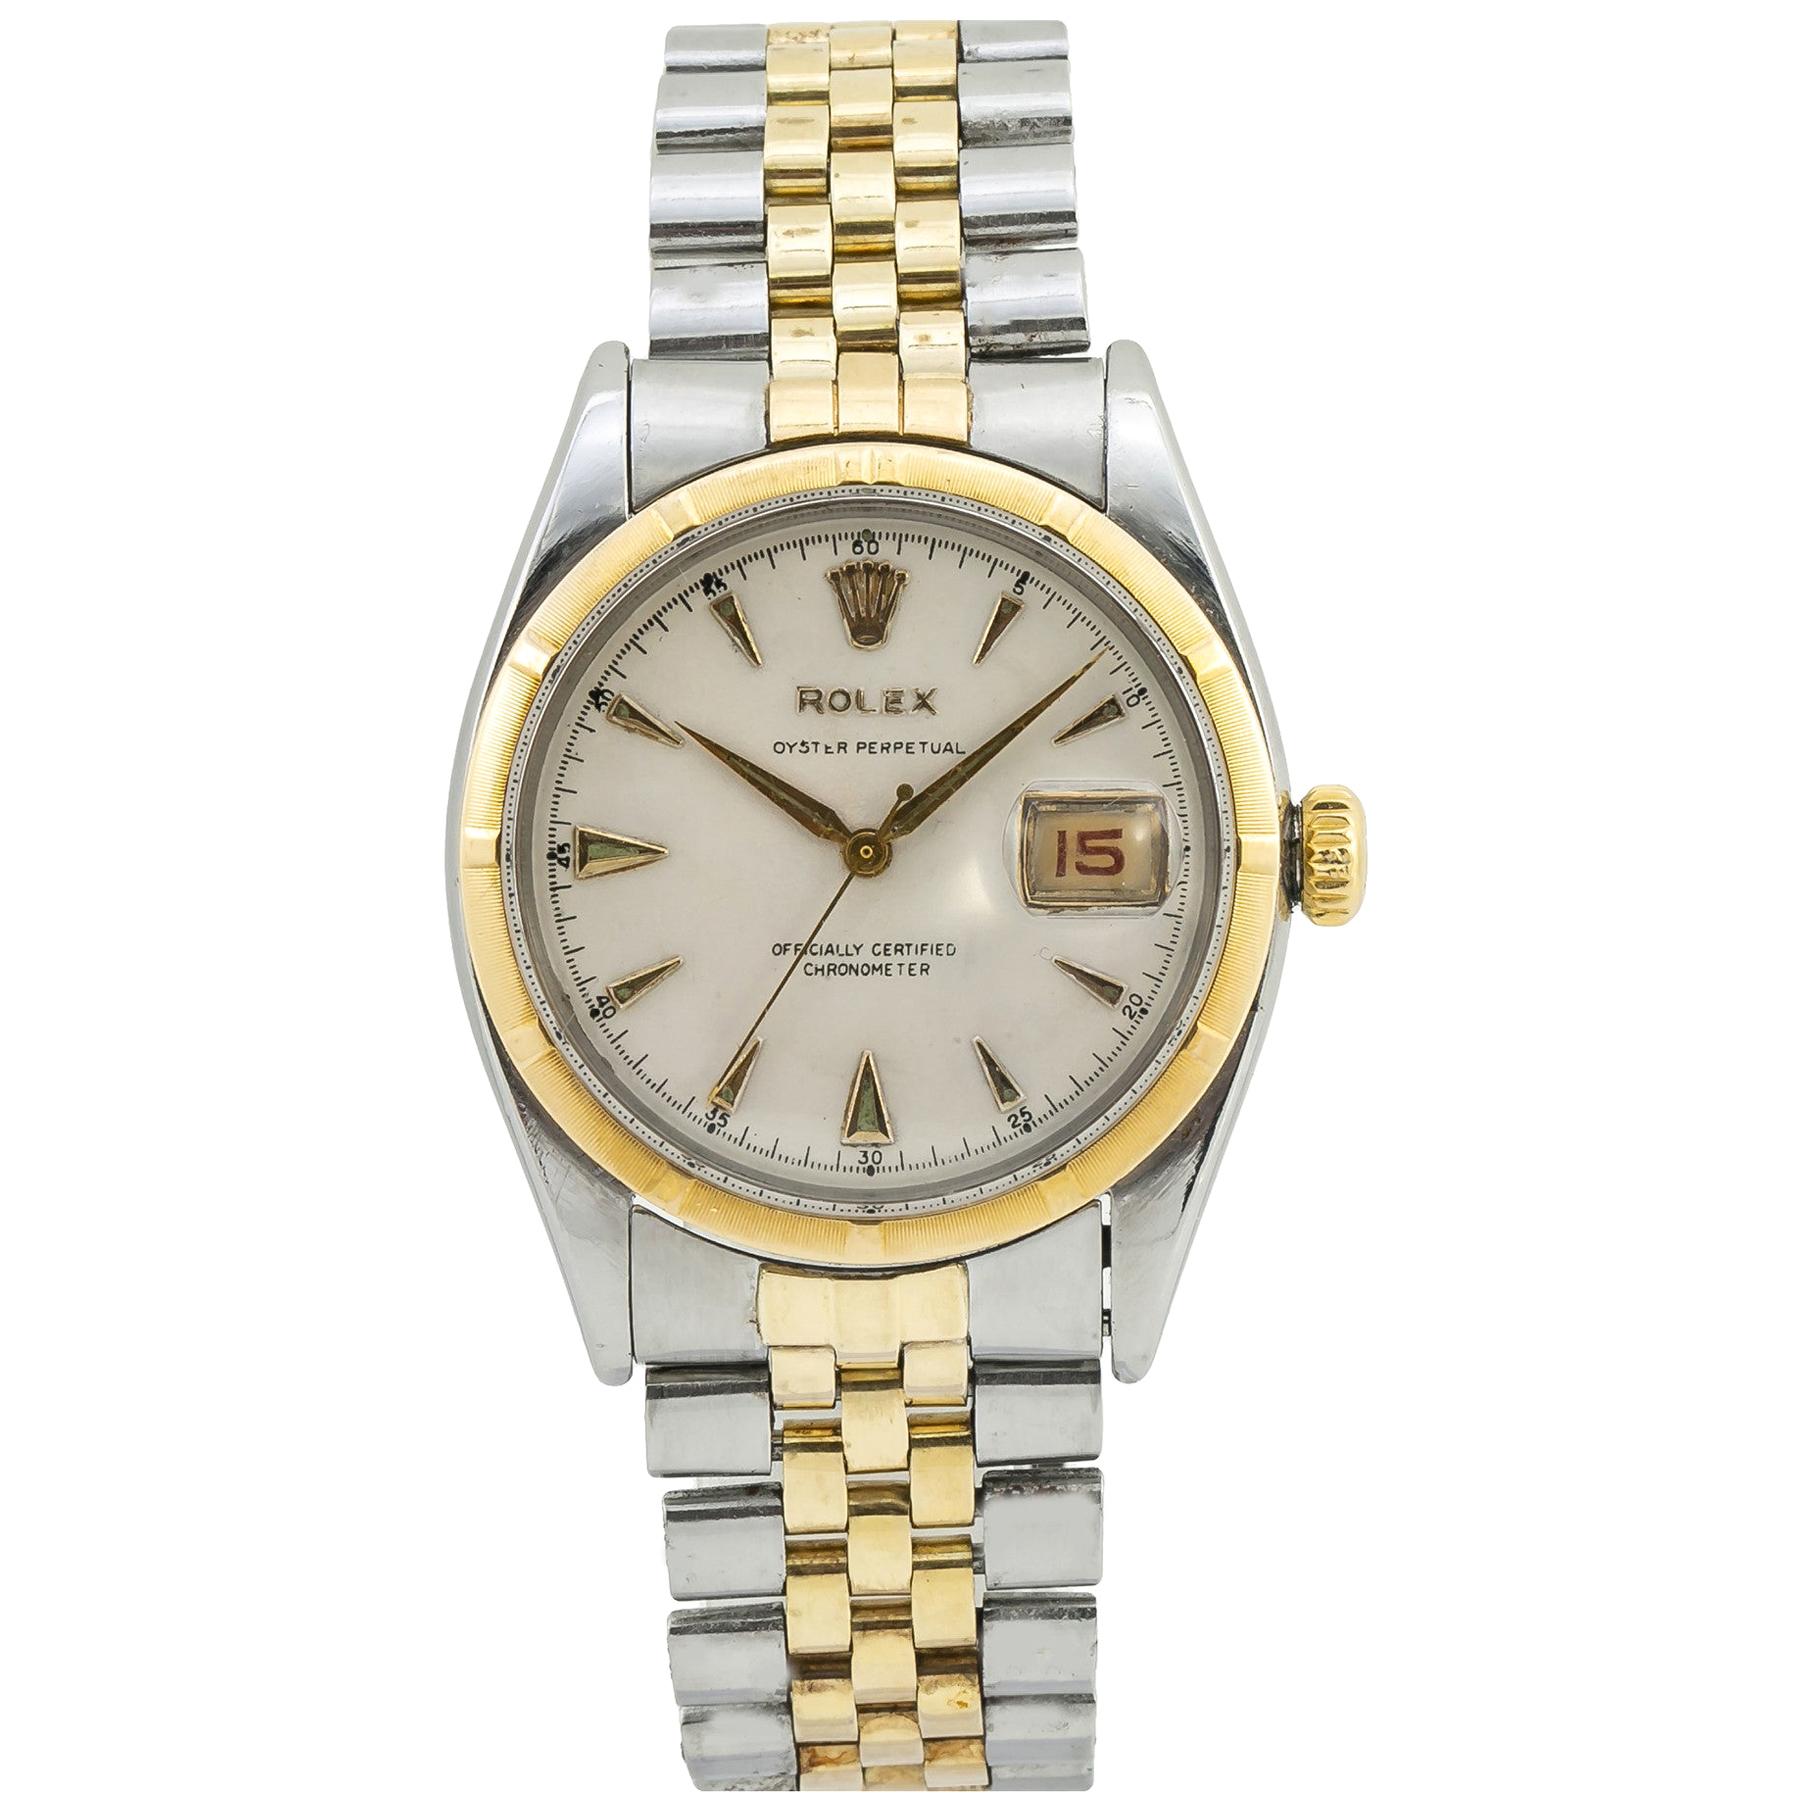 Rolex Oyster Perpetual 6305, Ivory Dial, Certified and Warranty For Sale